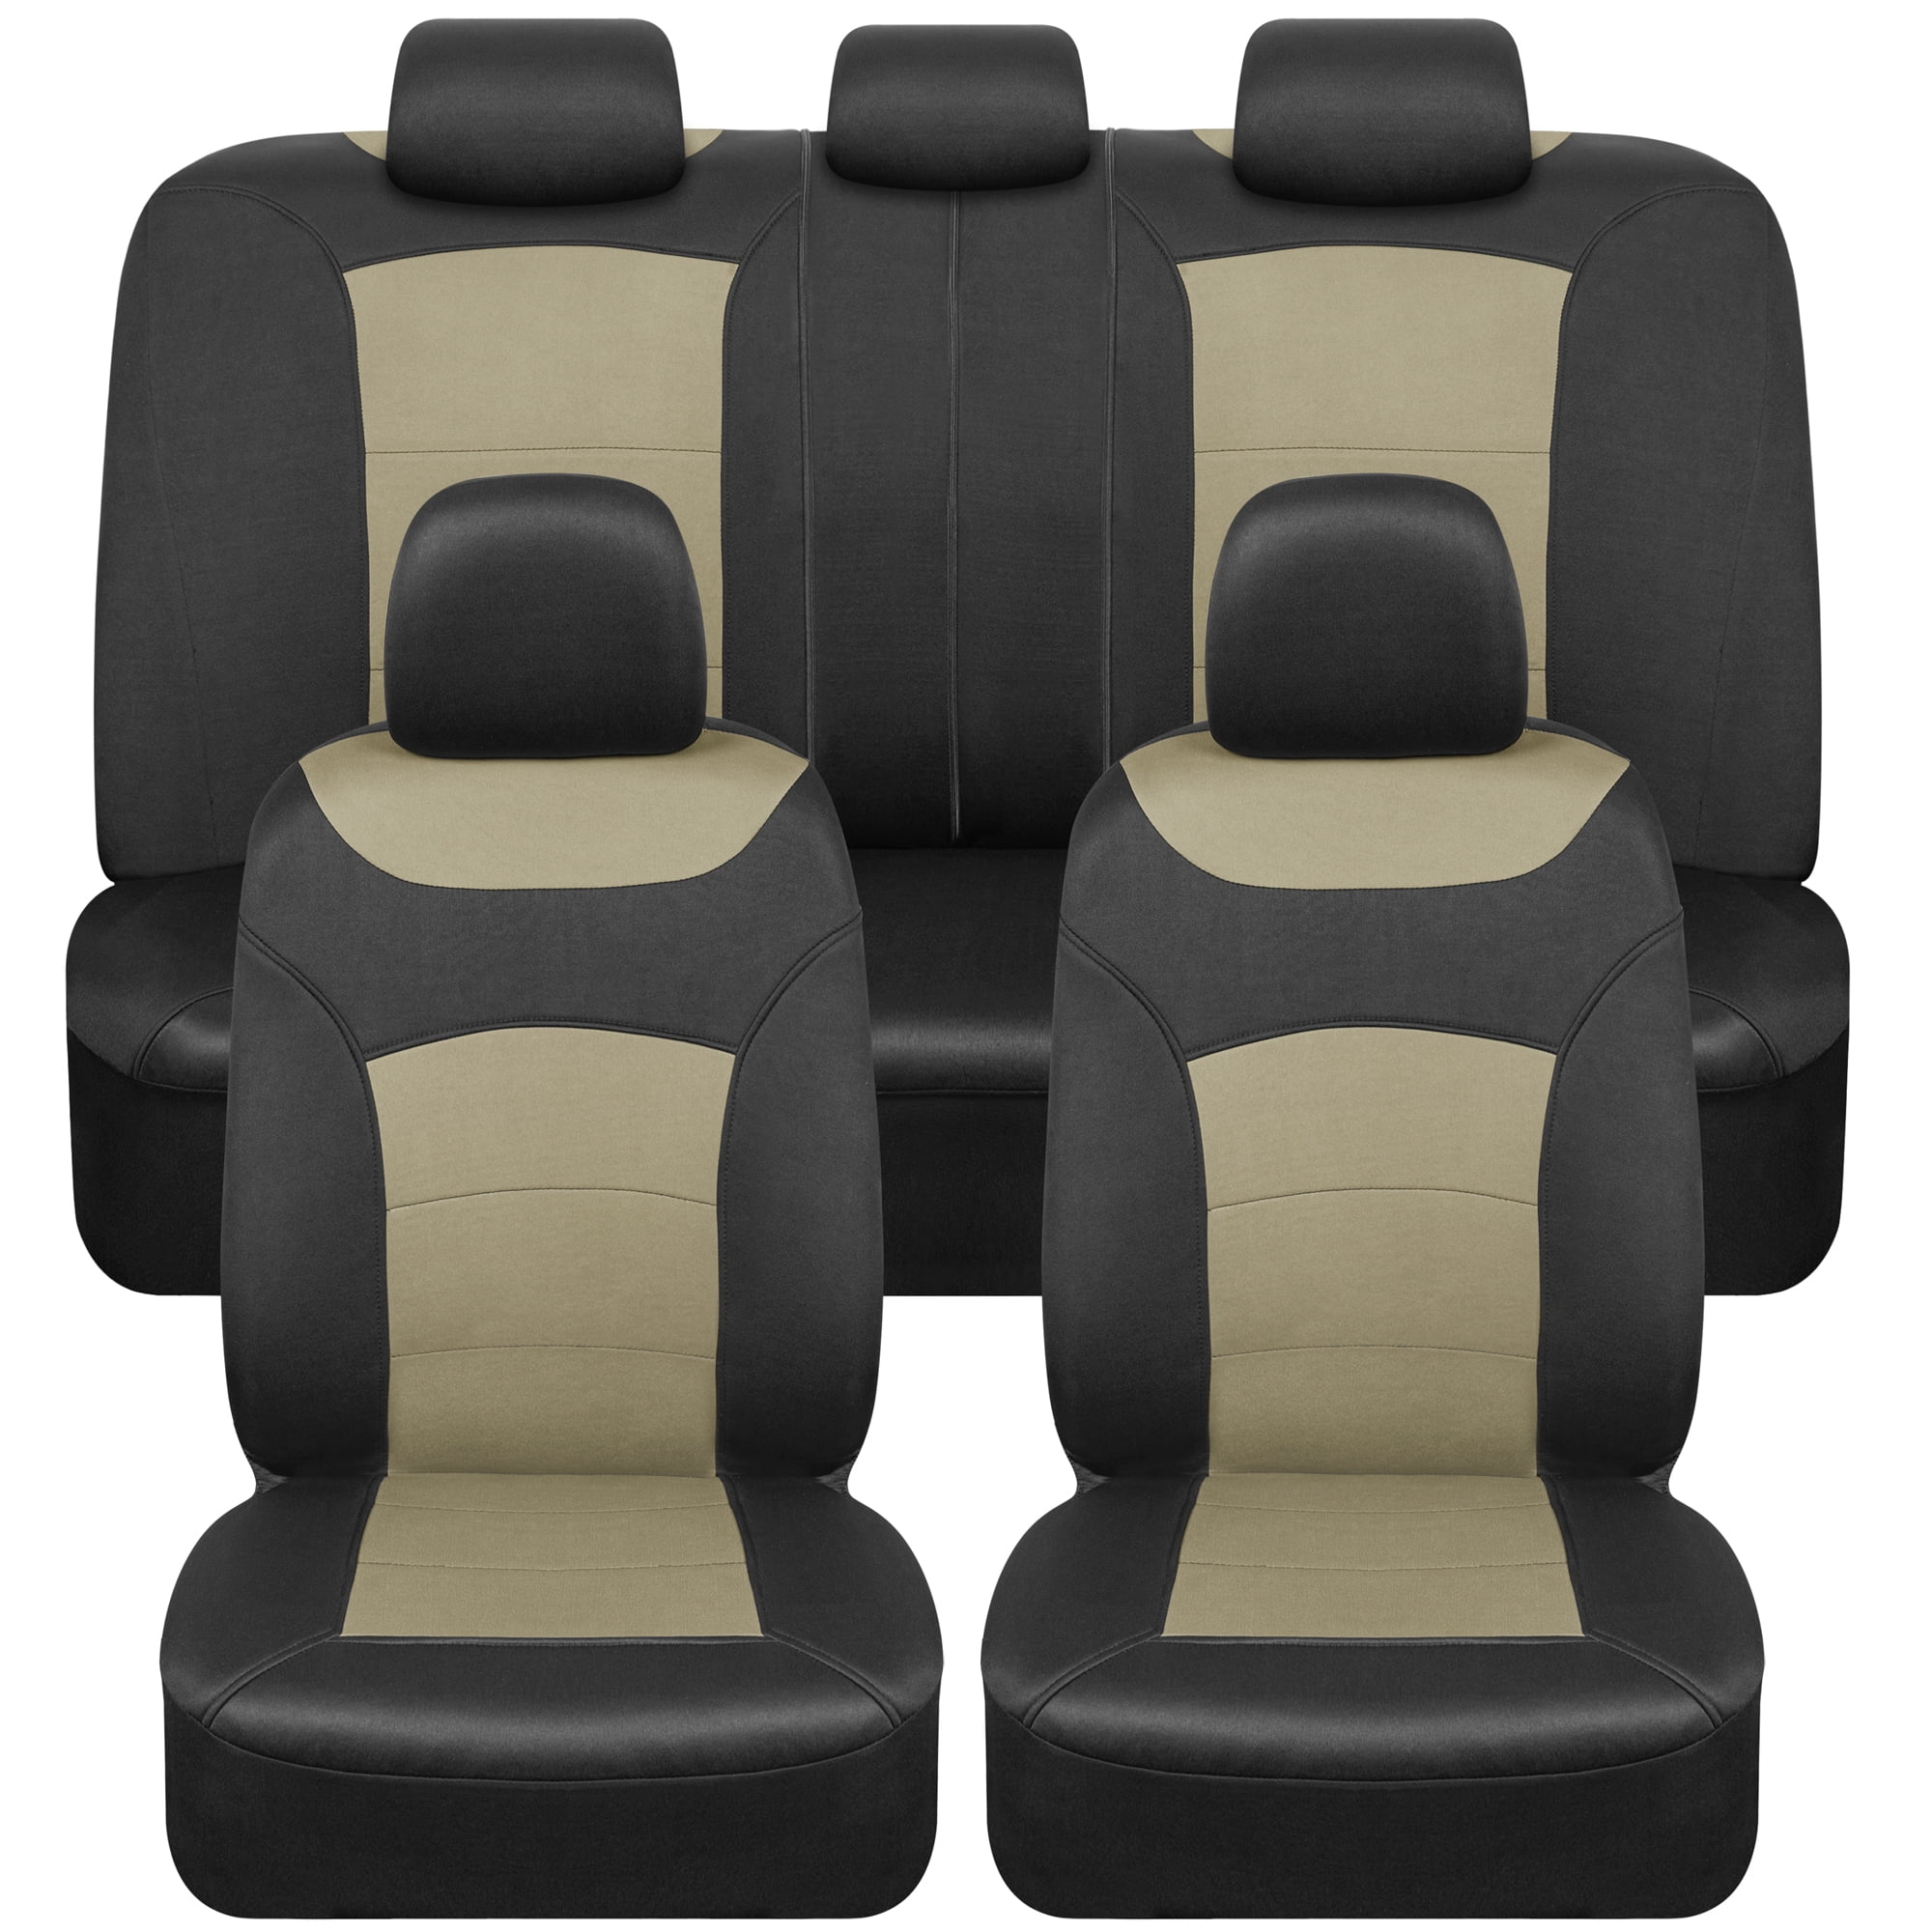 carXS PU Leather Car Seat Covers, Full Set Front & Rear Cover in Tan Beige